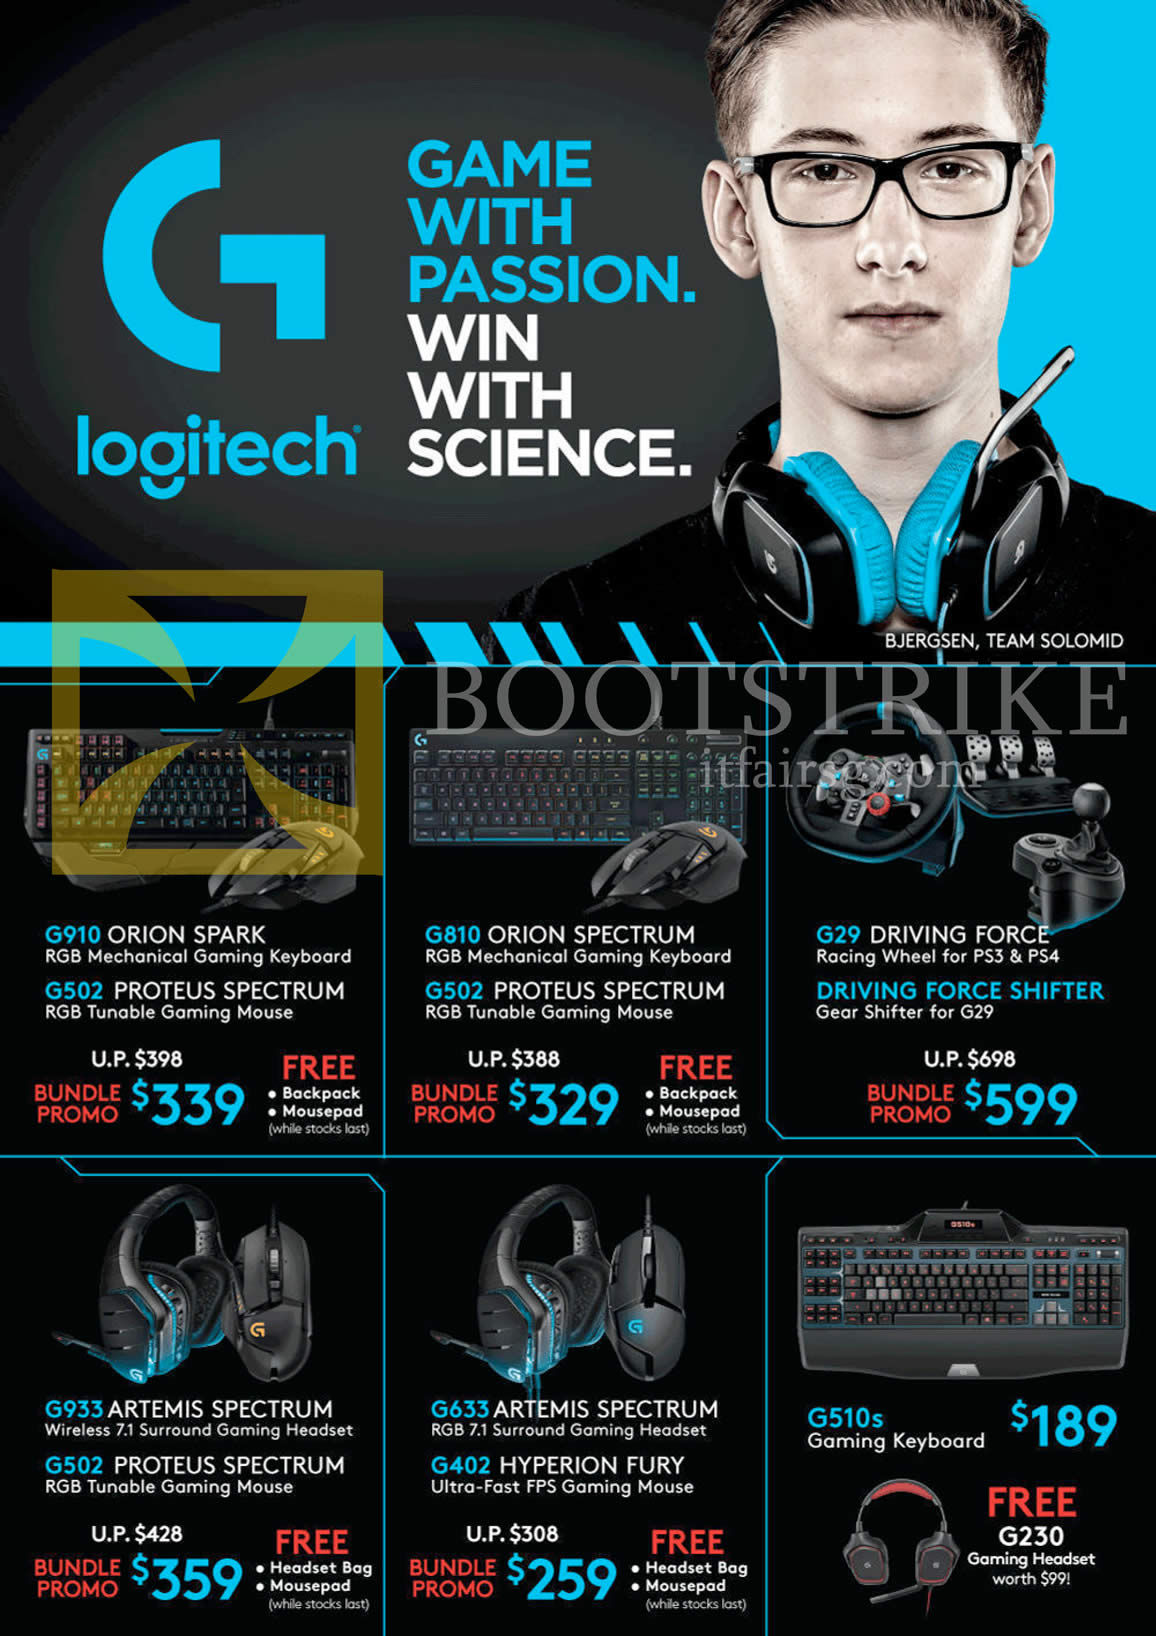 IT SHOW 2016 price list image brochure of Logitech Gaming Keyboards, Mouse, G910, G502, G810, G29, G933, G633, G402, G510s